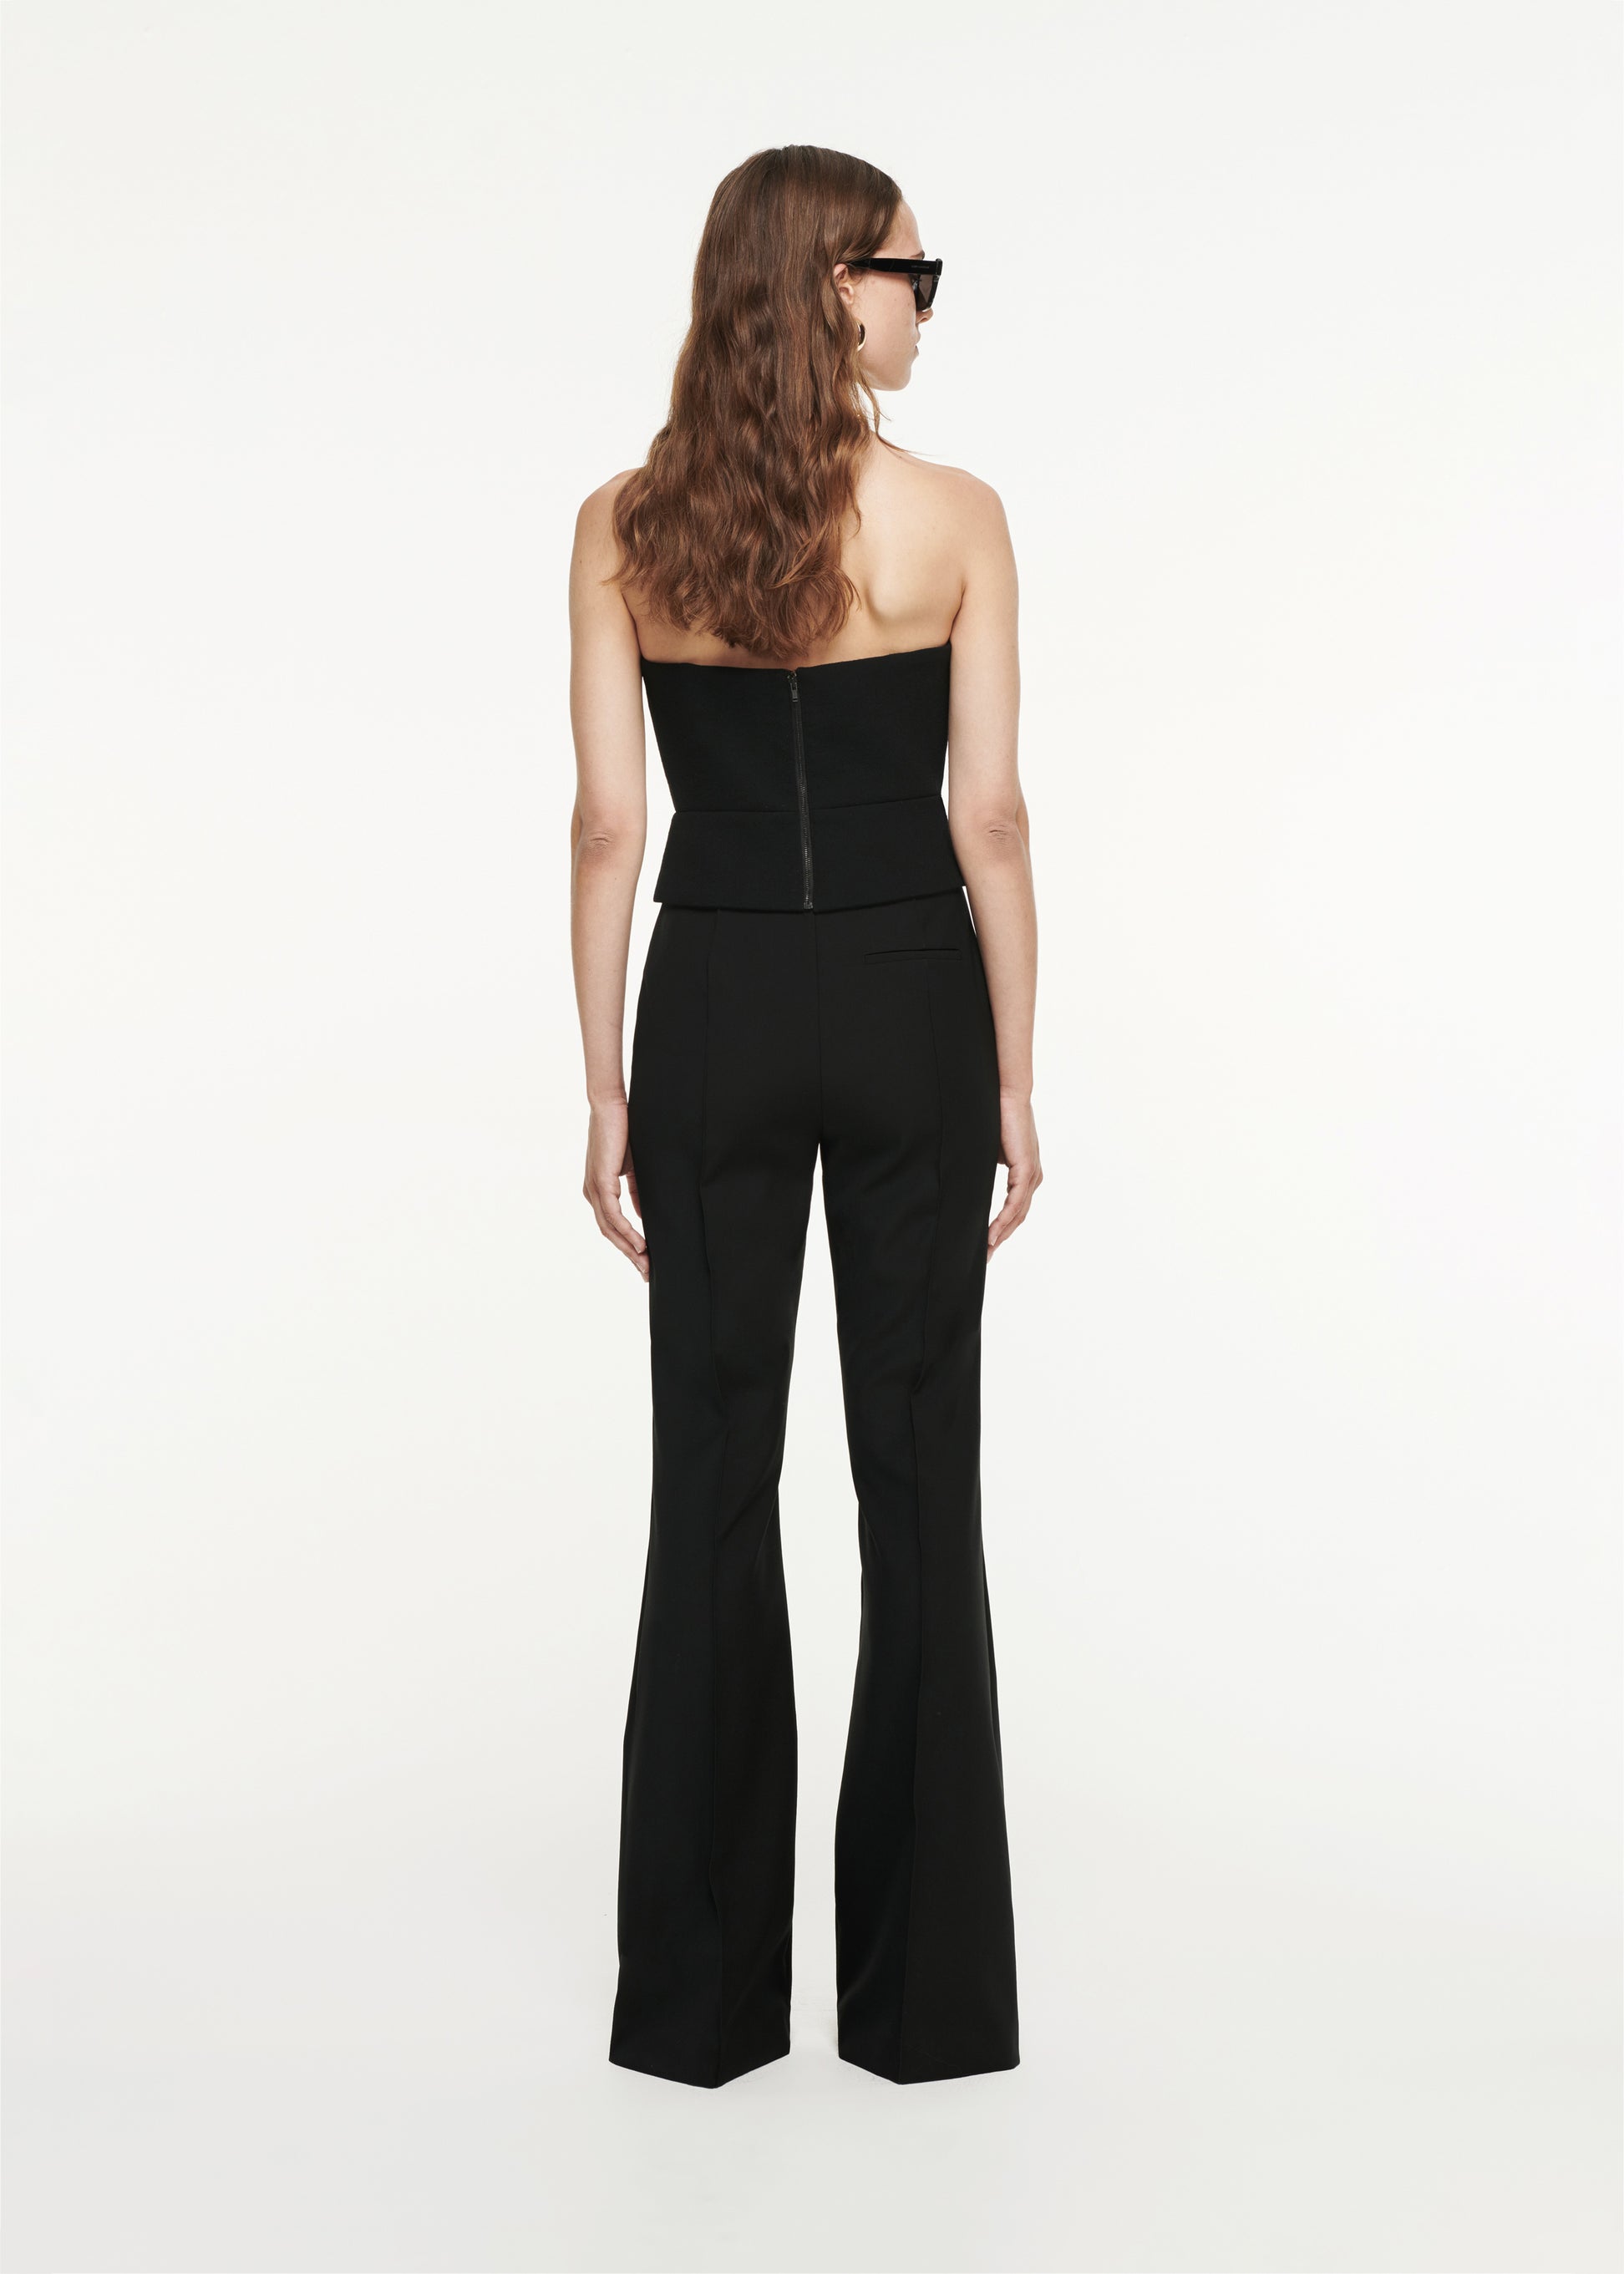 The back of a woman wearing the Flared Wool Trouser in black